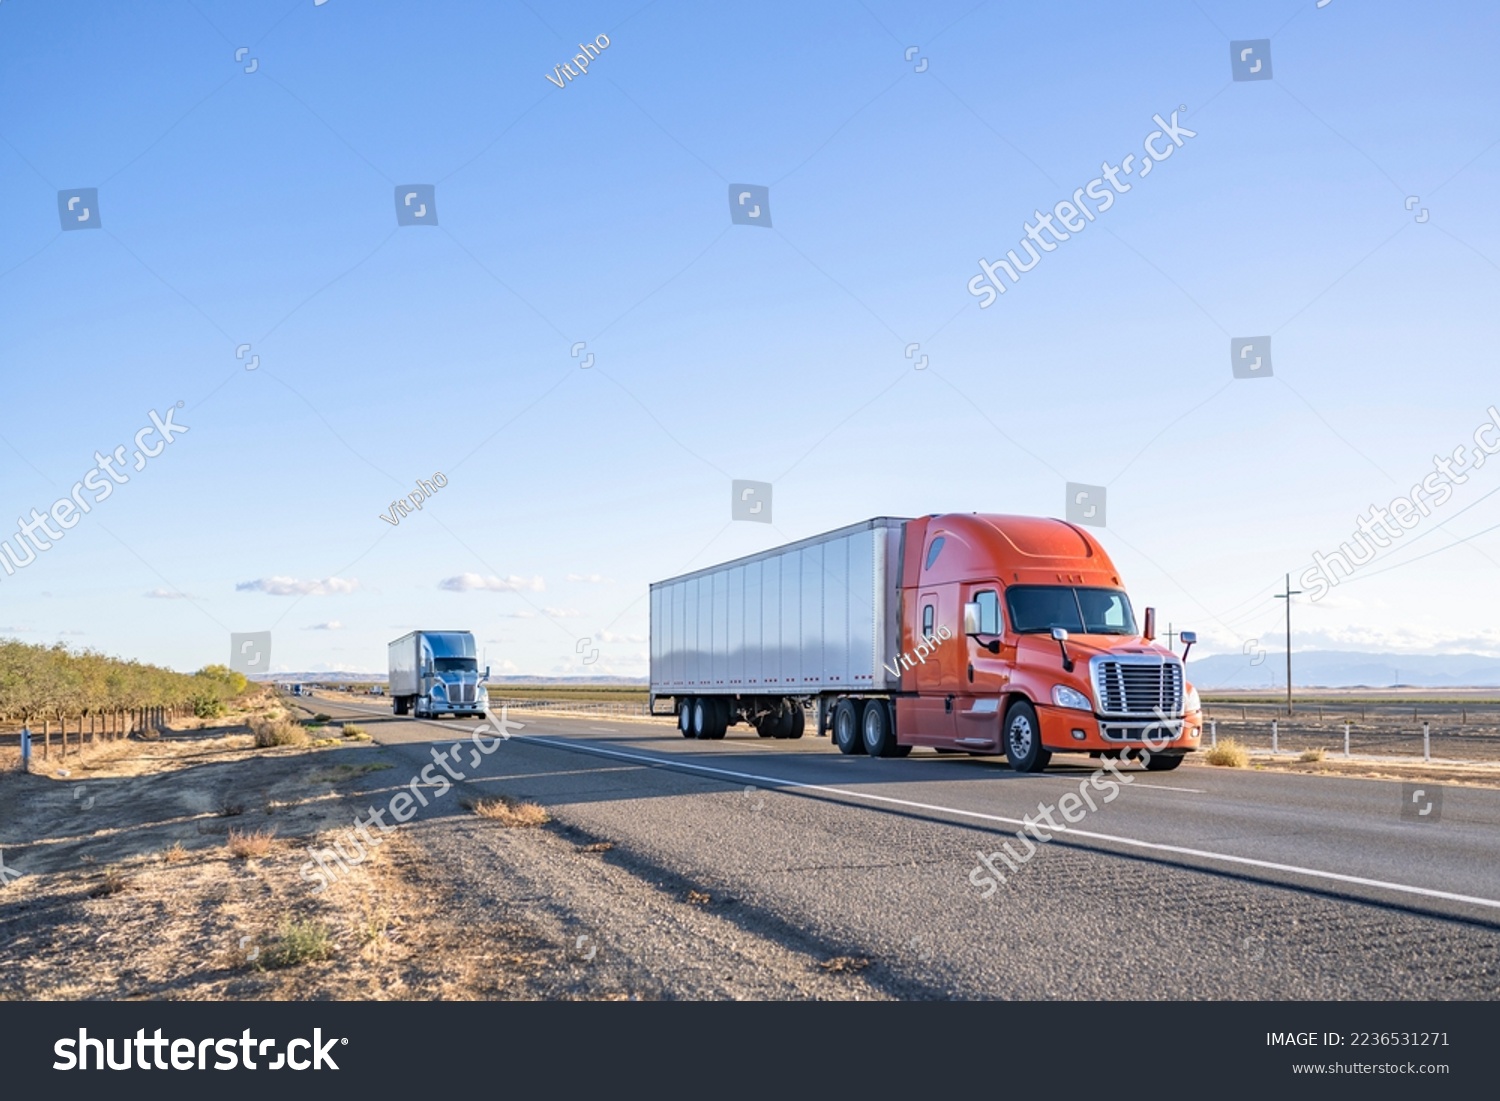 Industrial long hauler big rigs semi trucks team transporting commercial cargo in loaded dry van semi trailers running together on the flat straight highway road in California #2236531271